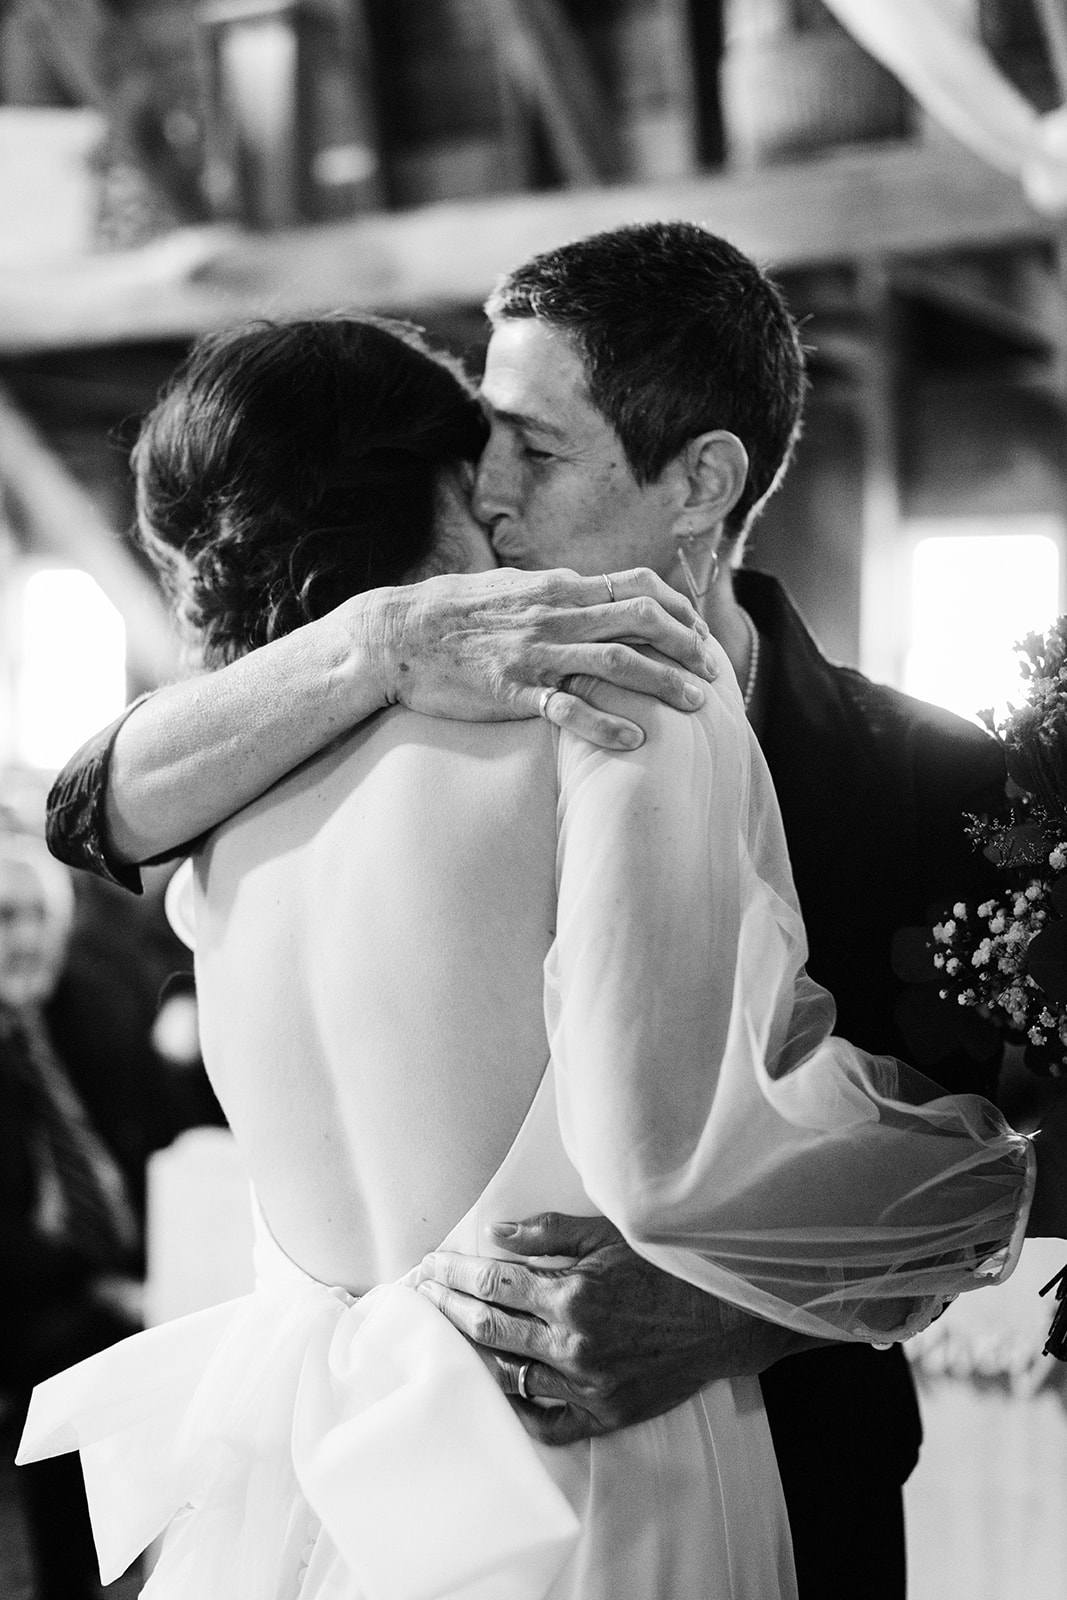 mother and daughter embrace at Jewish wedding